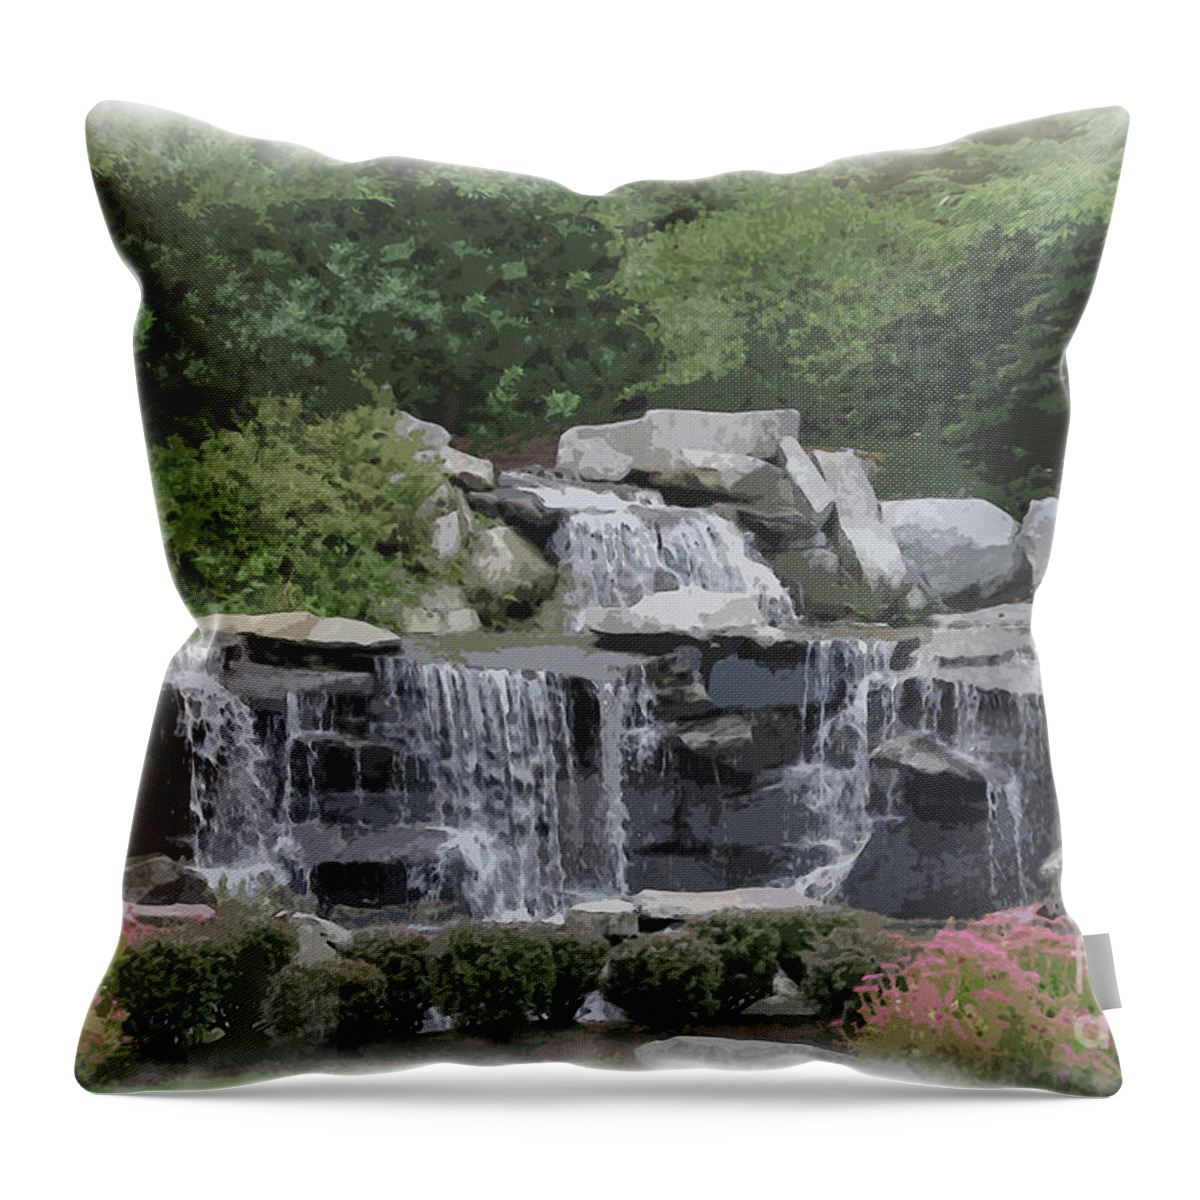 Waterfalls Throw Pillow featuring the digital art Waterfalls Within The Garden by Kirt Tisdale